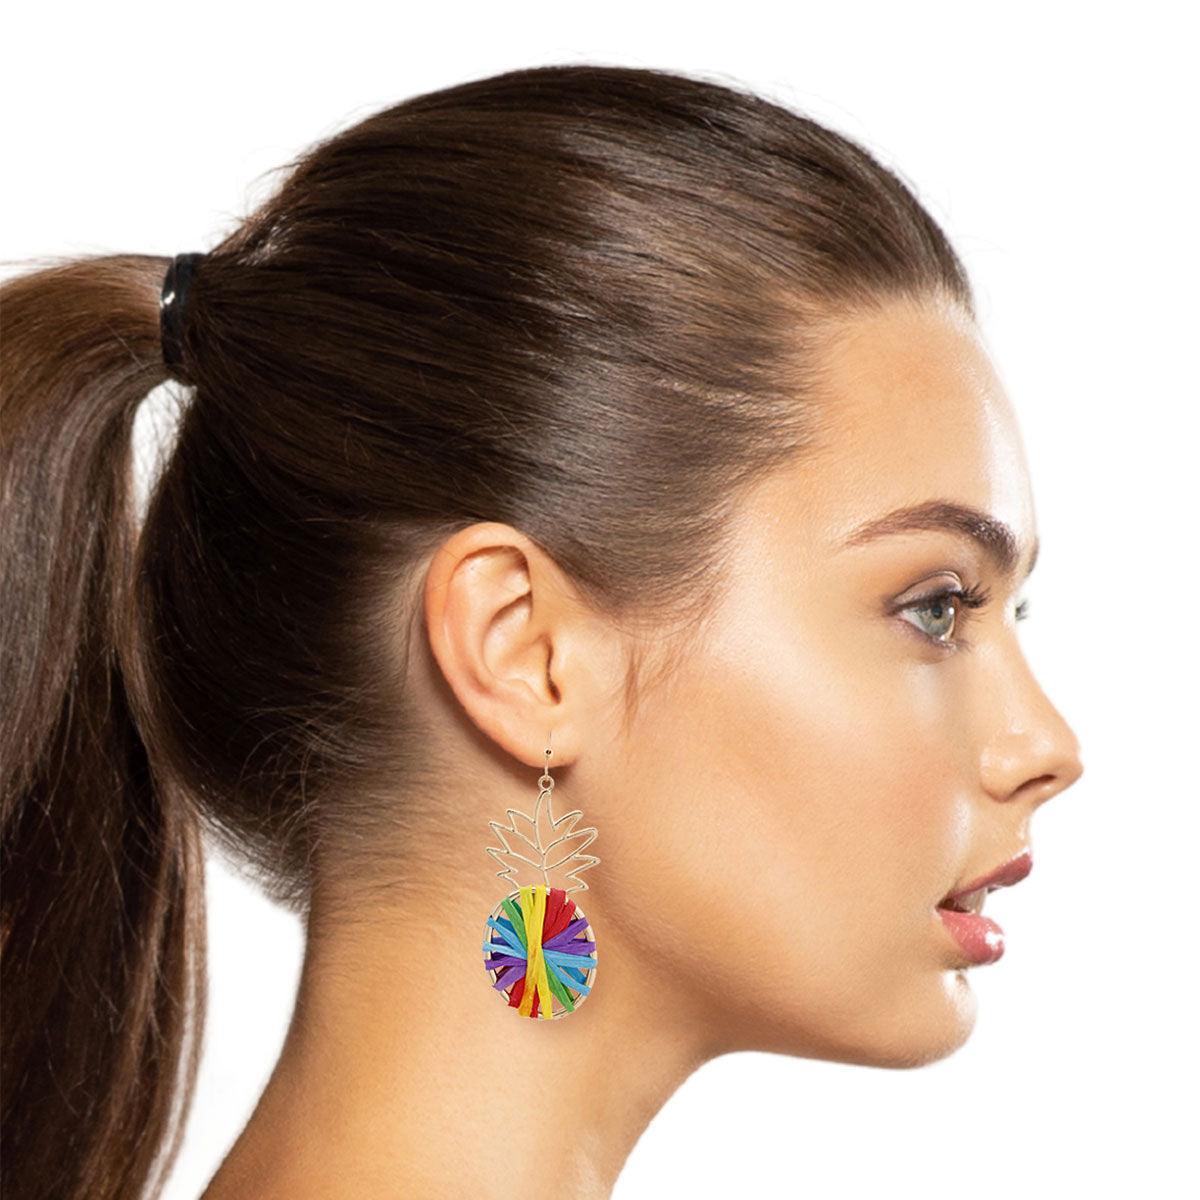 Get Tropical: Shop Our Latest Pineapple Earrings Rainbow/Gold